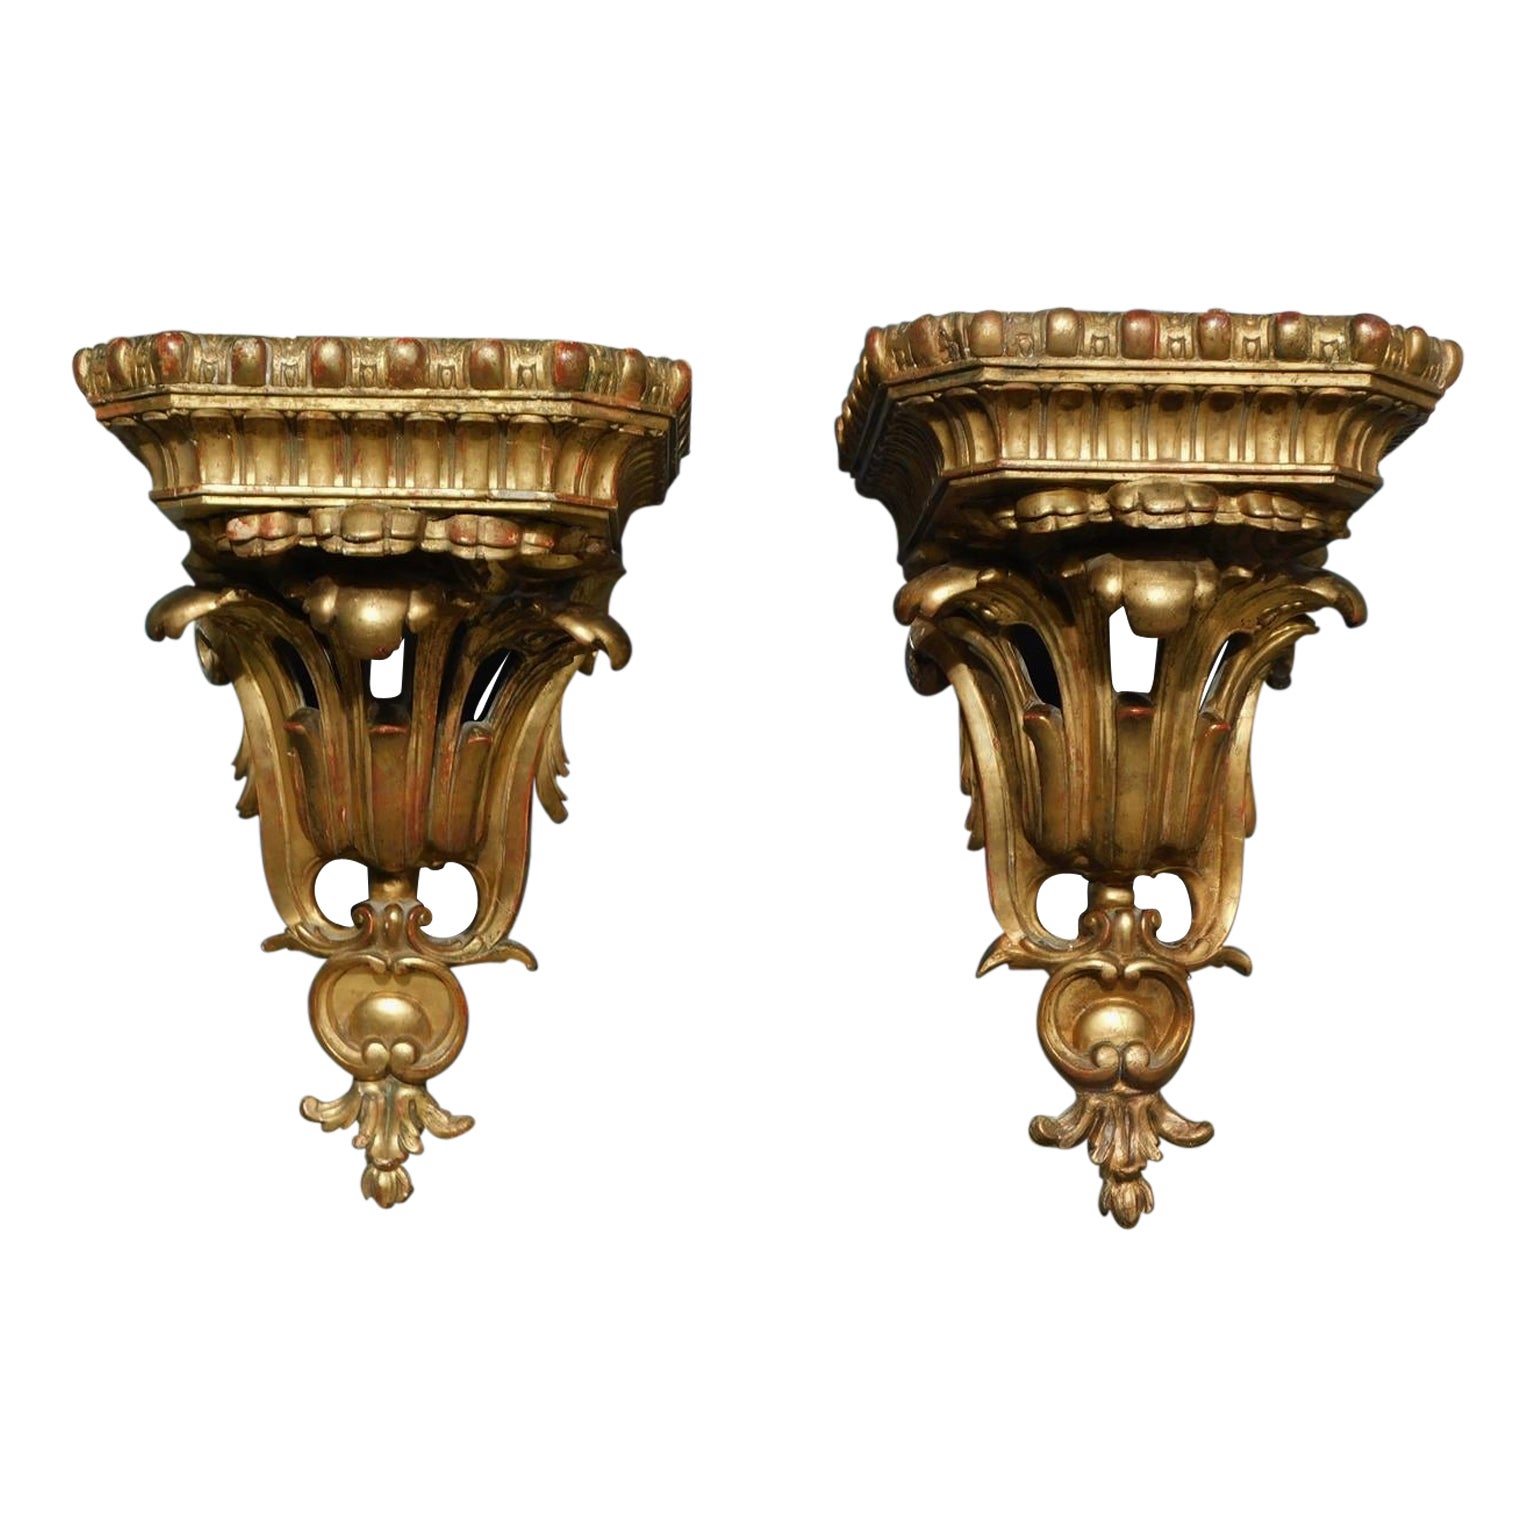 Pair of French Gilt Carved Wood & Gesso Foliage Gadrooned Wall Brackets, C. 1820 For Sale